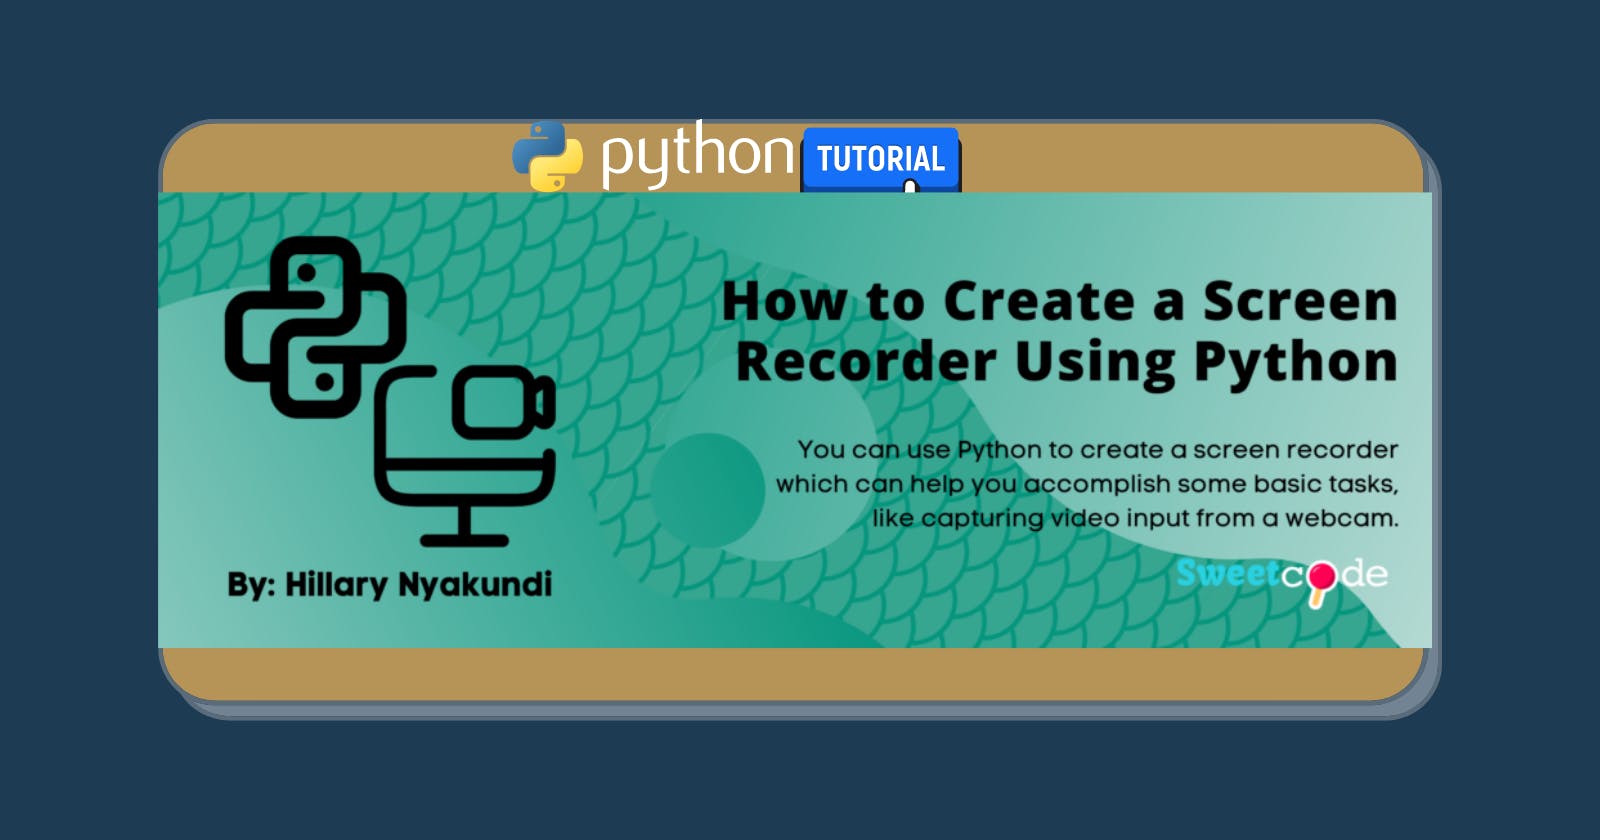 How to Create a Screen Recorder Using Python